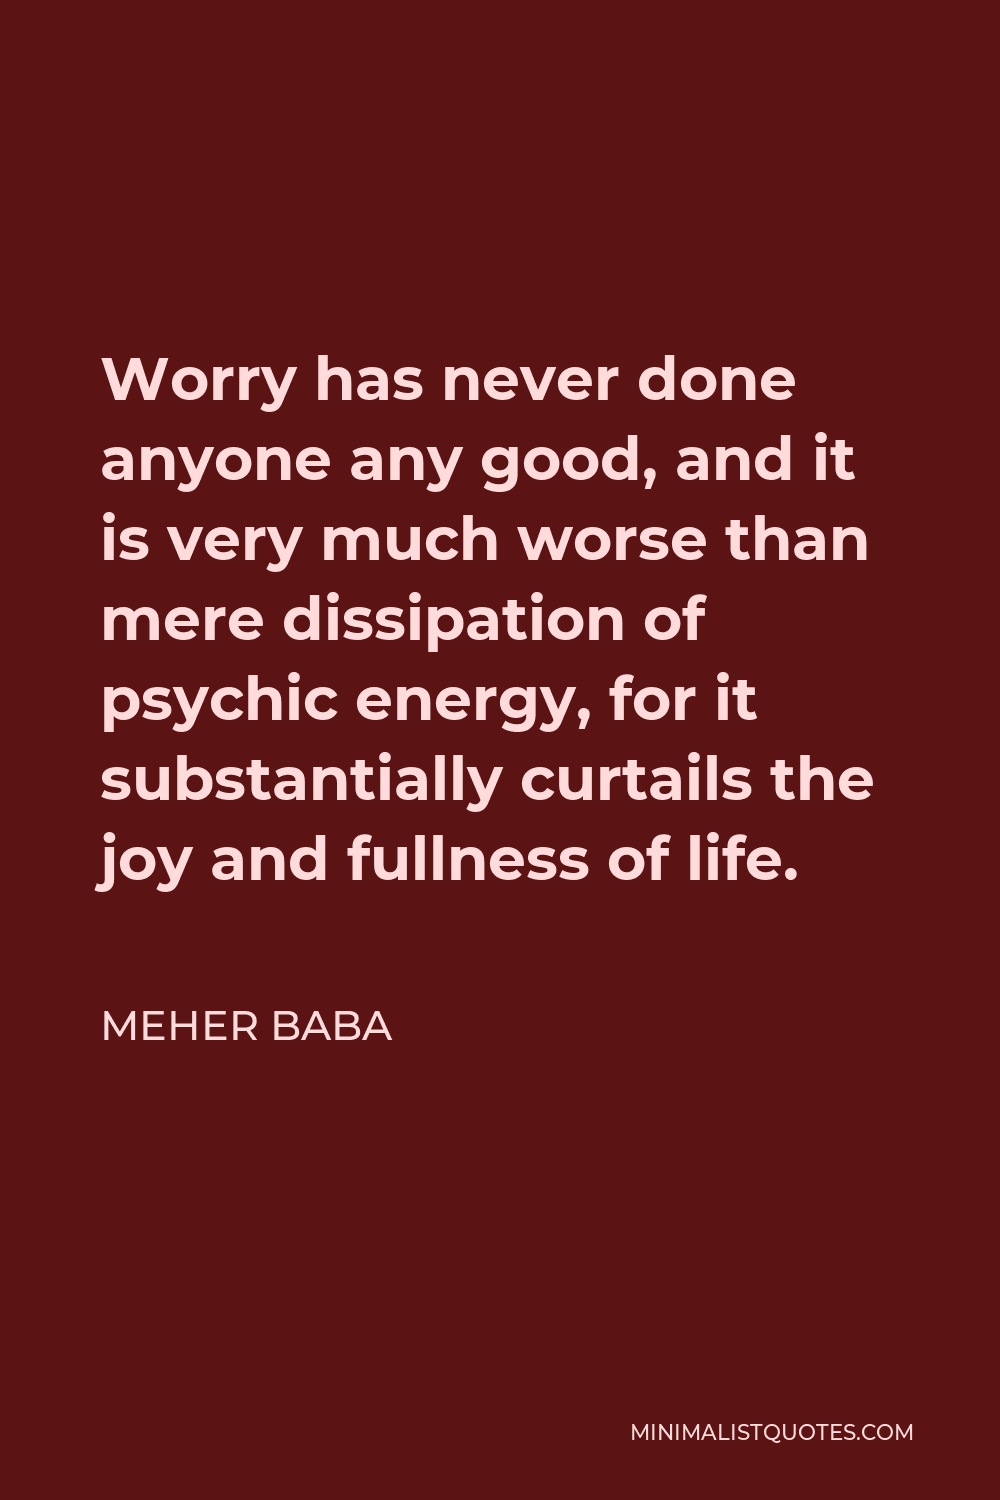 Meher Baba Quote - Worry has never done anyone any good, and it is very much worse than mere dissipation of psychic energy, for it substantially curtails the joy and fullness of life.